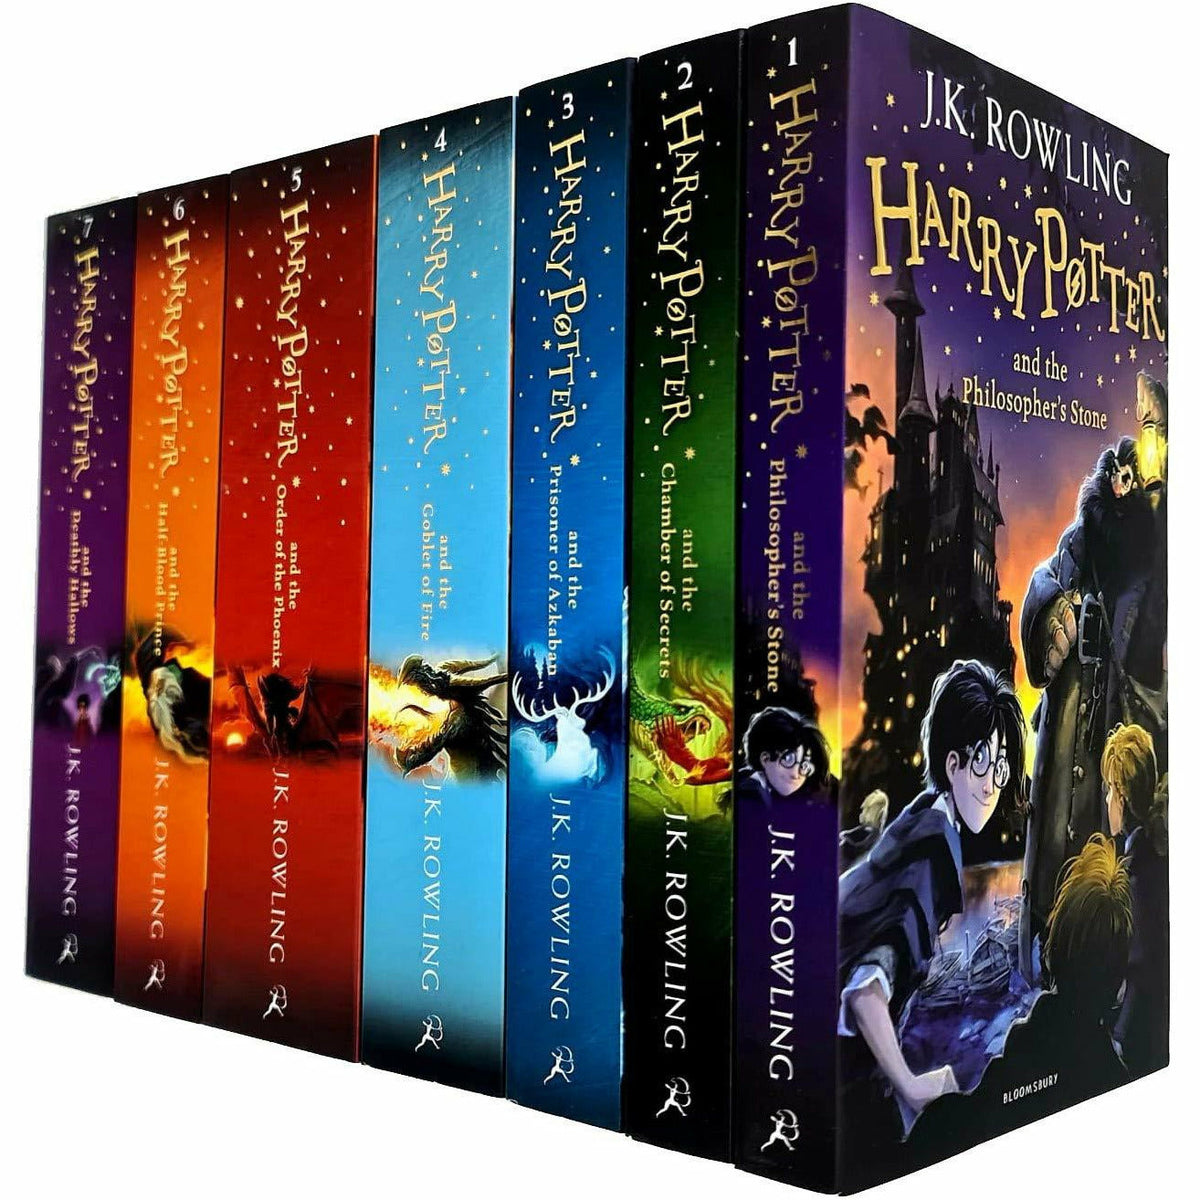 the last book of harry potter series